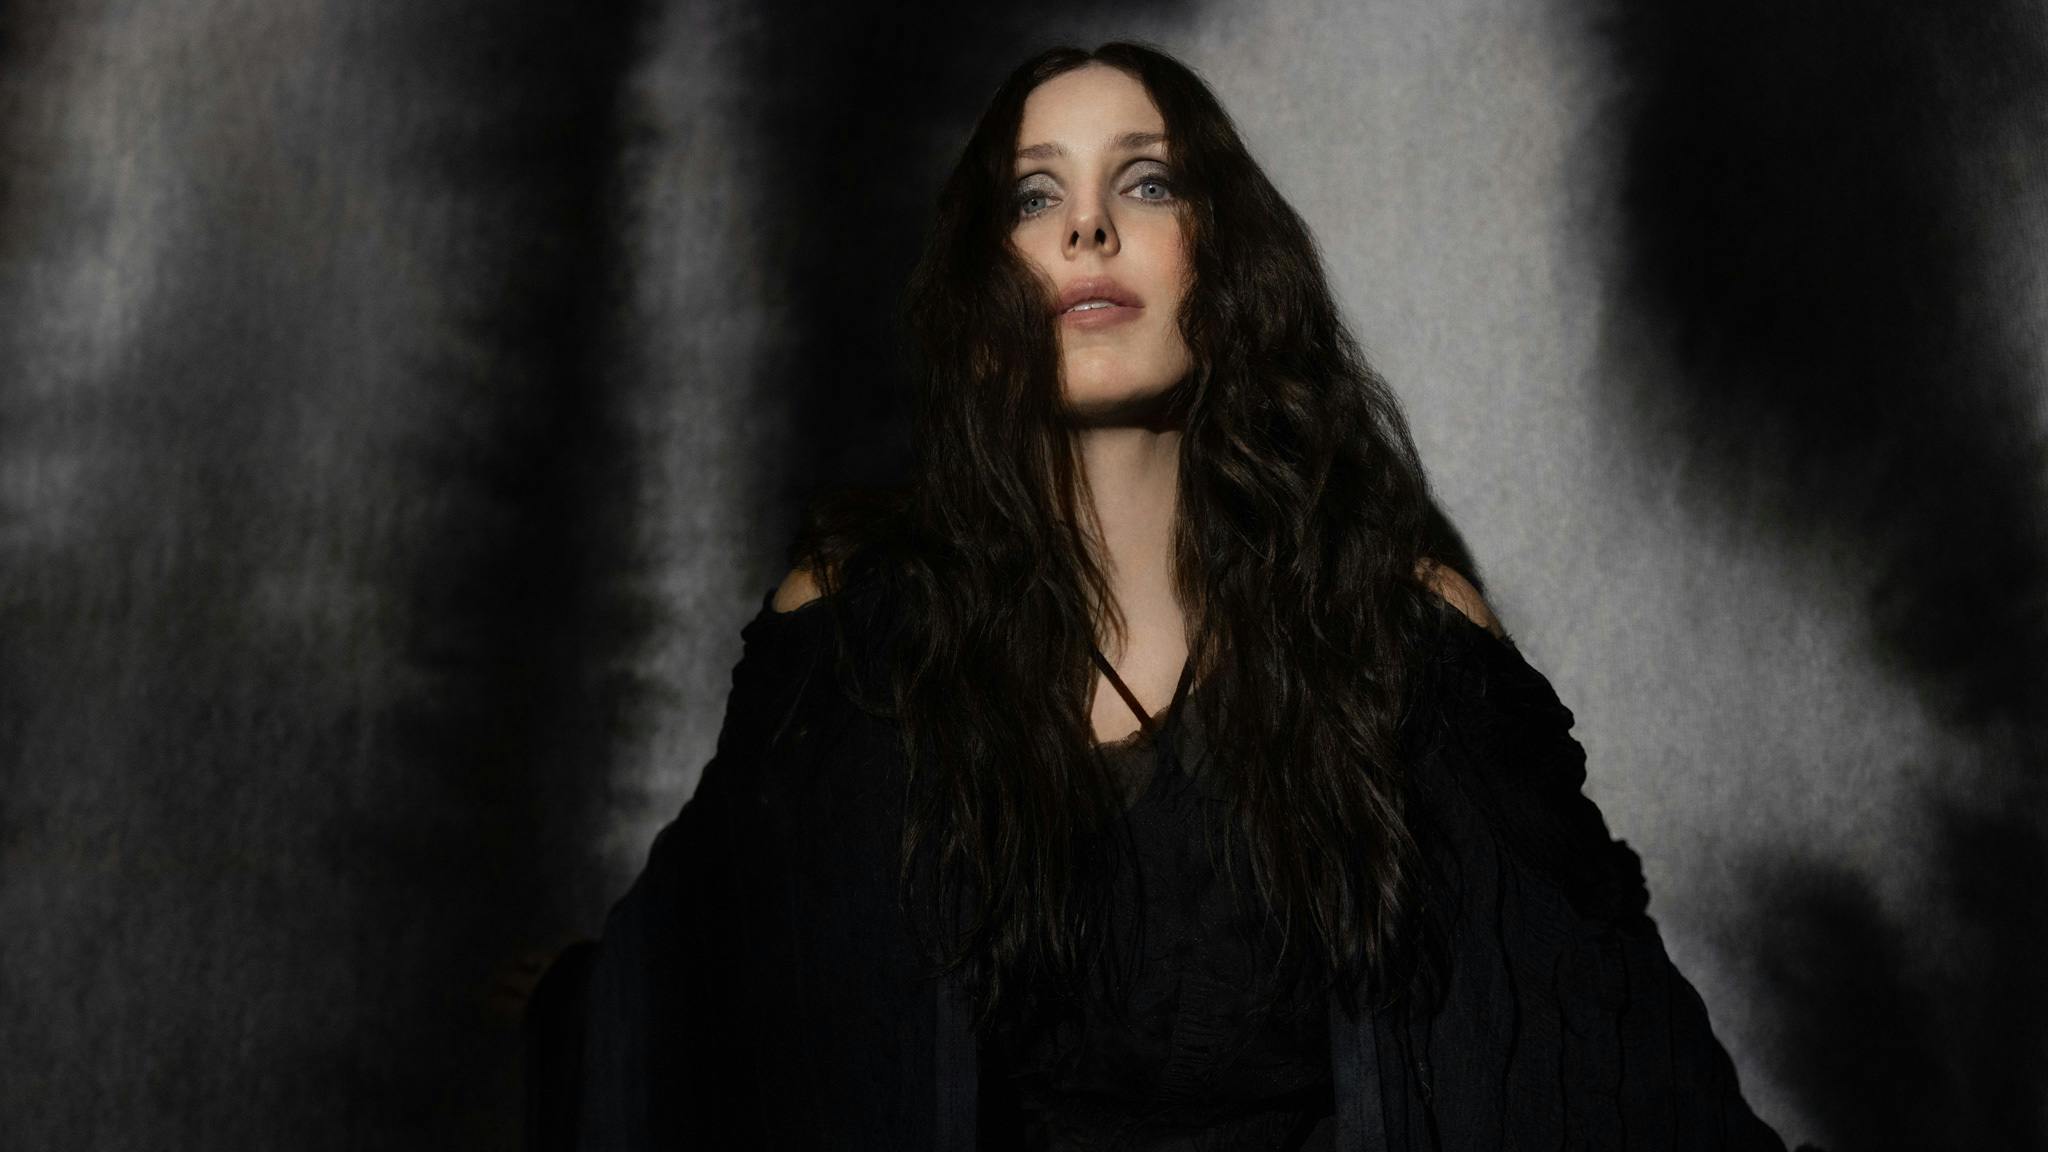 Chelsea Wolfe signs to Loma Vista, shares new single Dusk